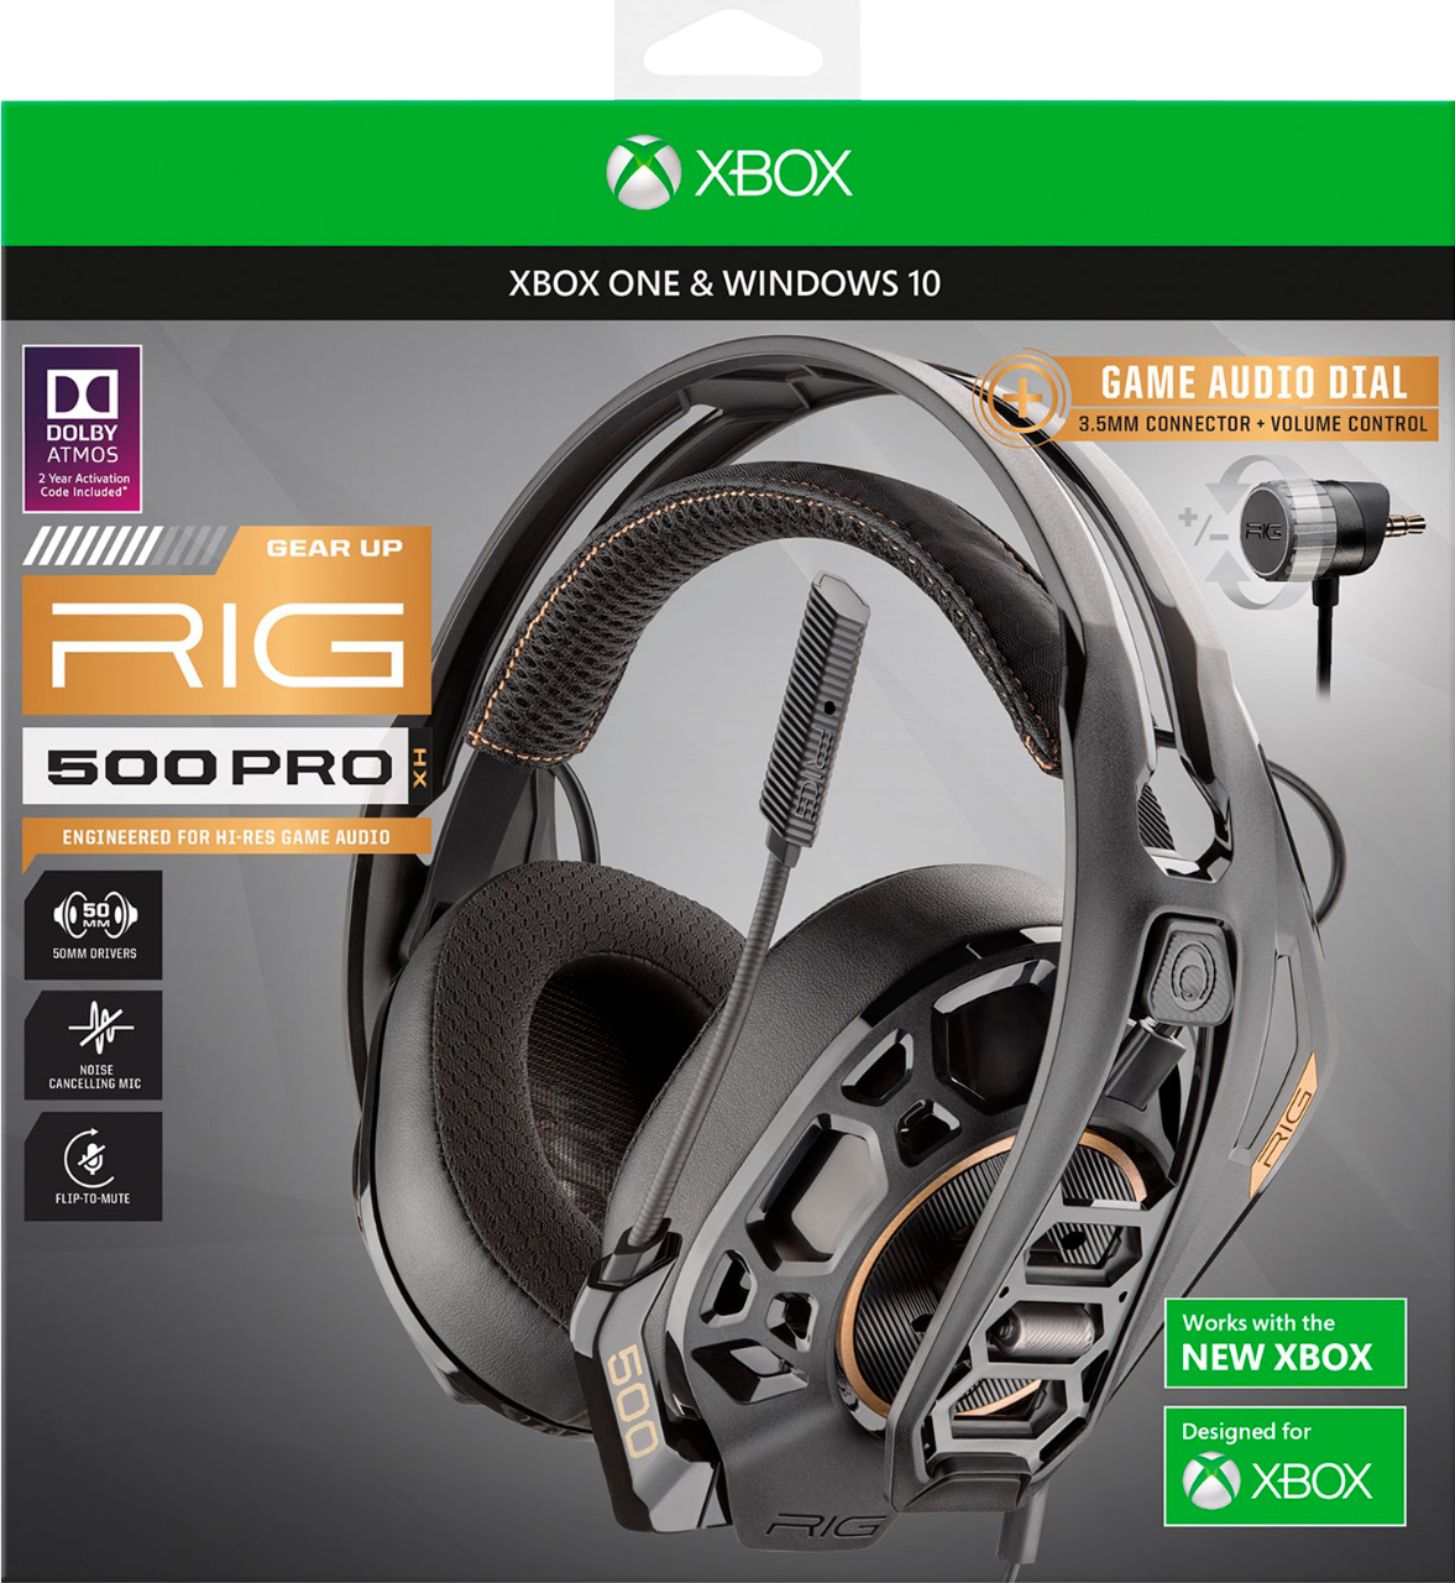 RIG 500 PRO HX 3D Audio Gaming Headset for Xbox series X|S and Xbox One - Black